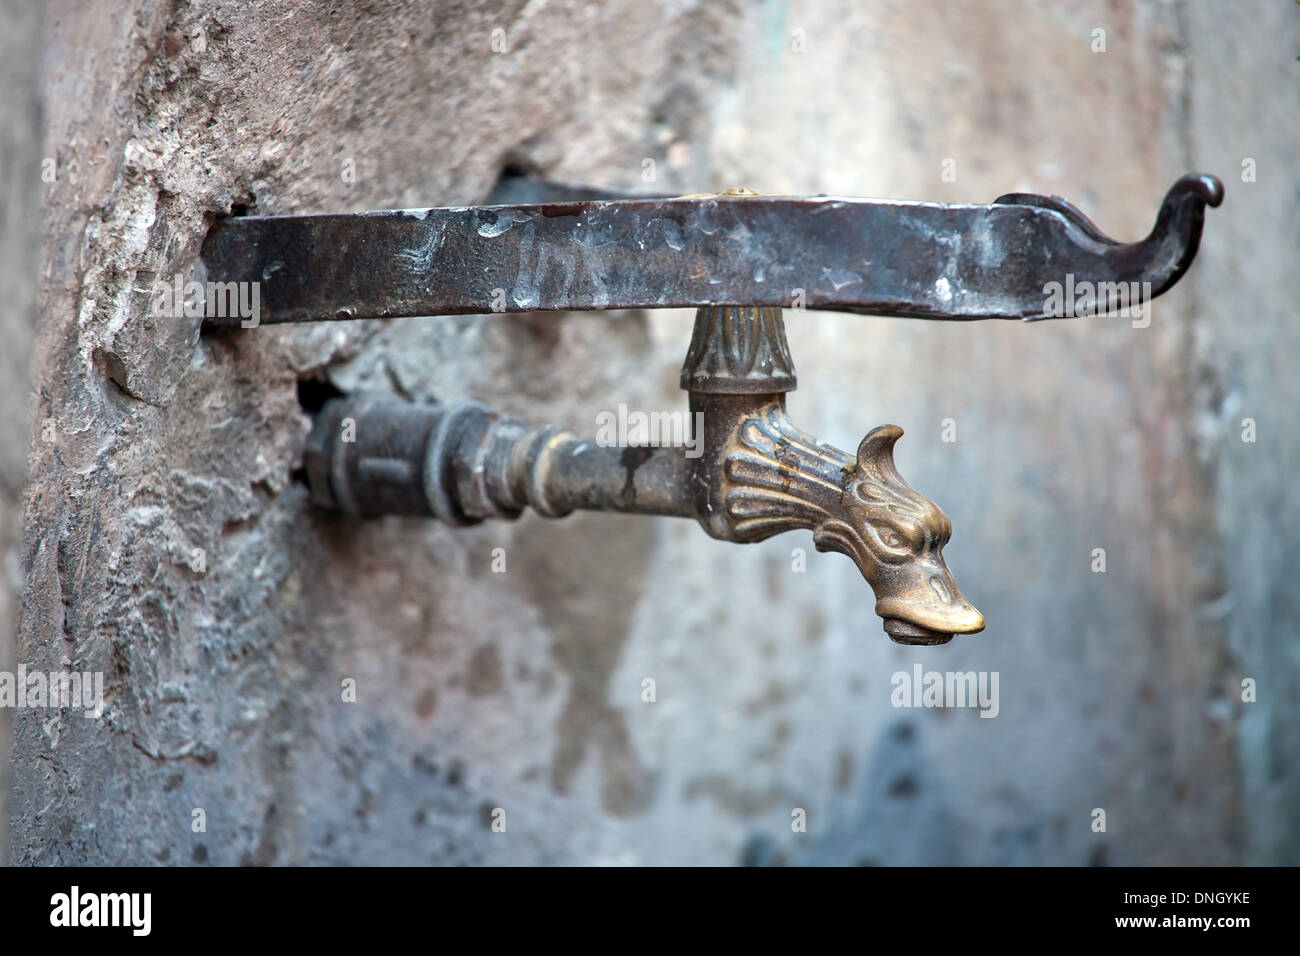 old copper water pump in dragon head form Stock Photo